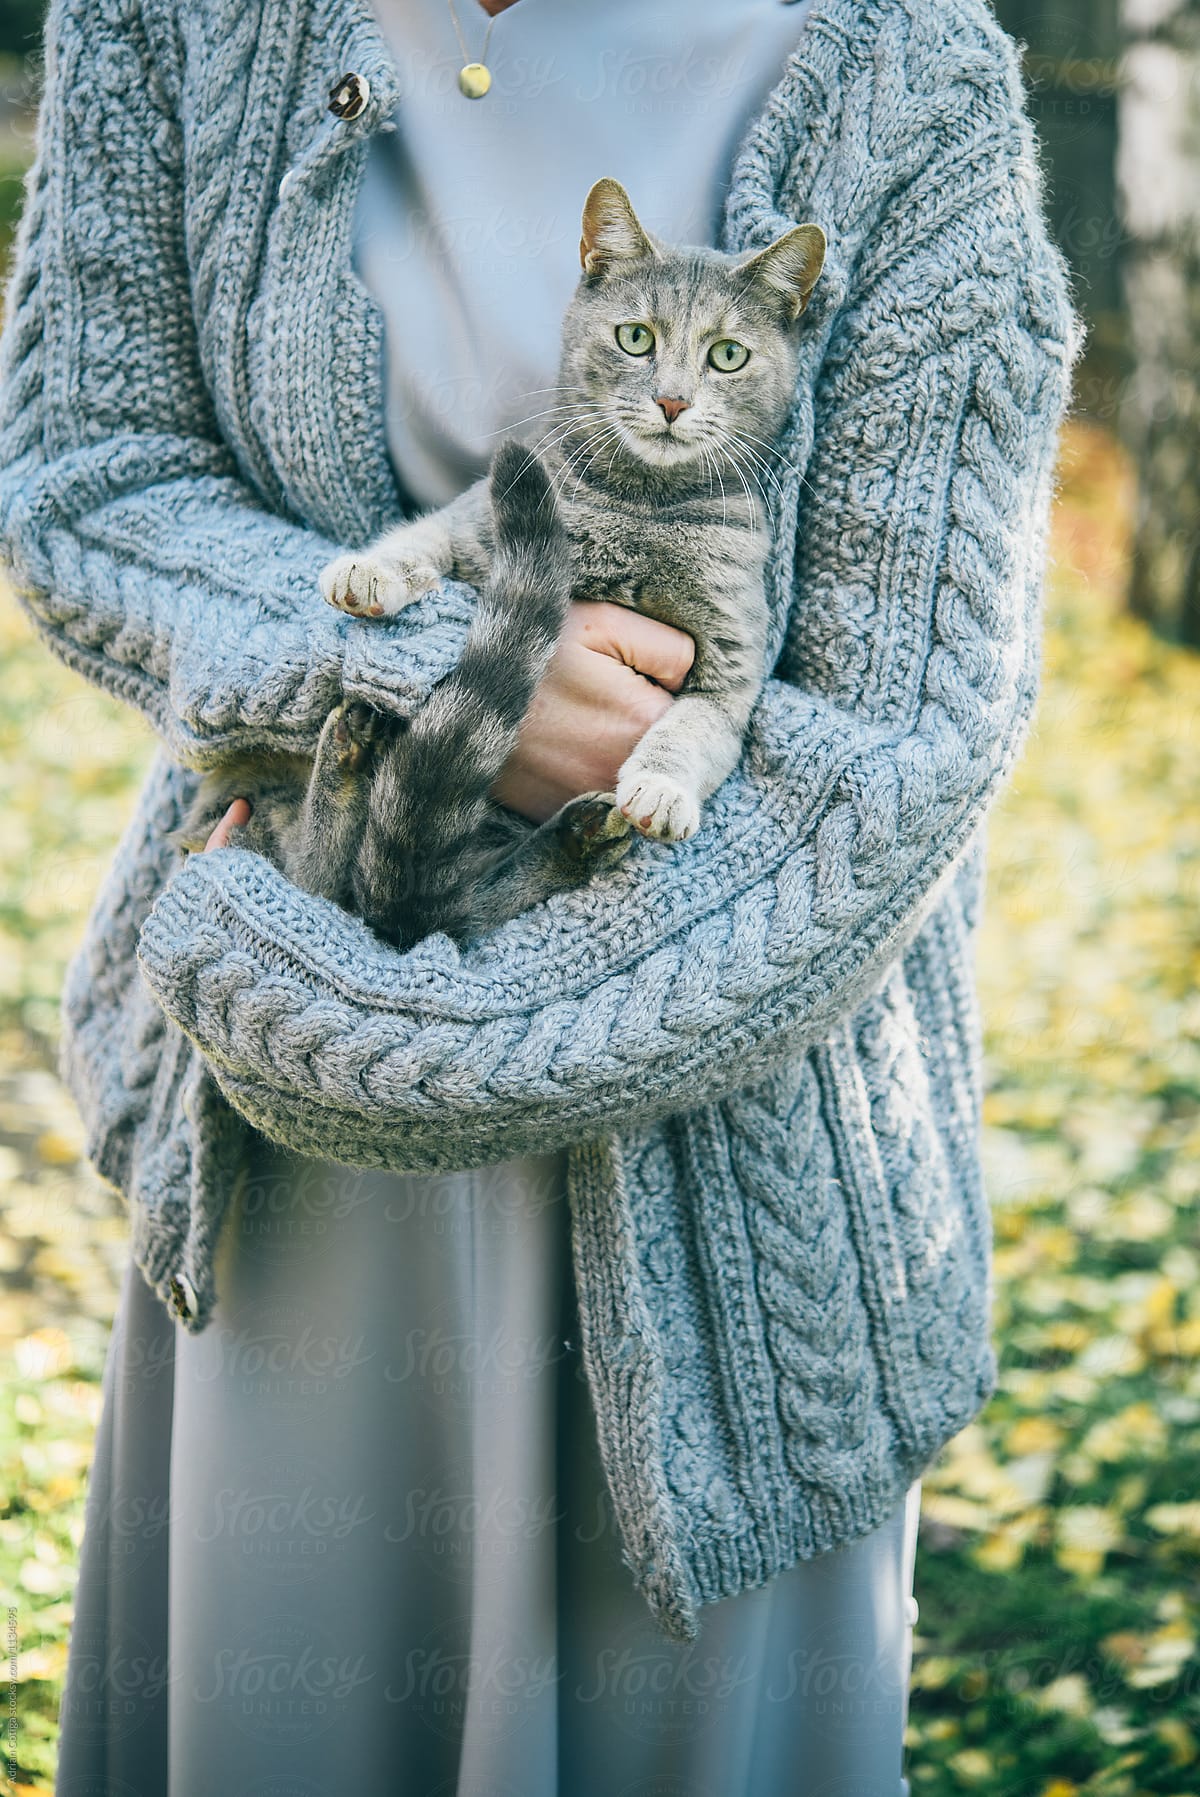 Woman holding a cat